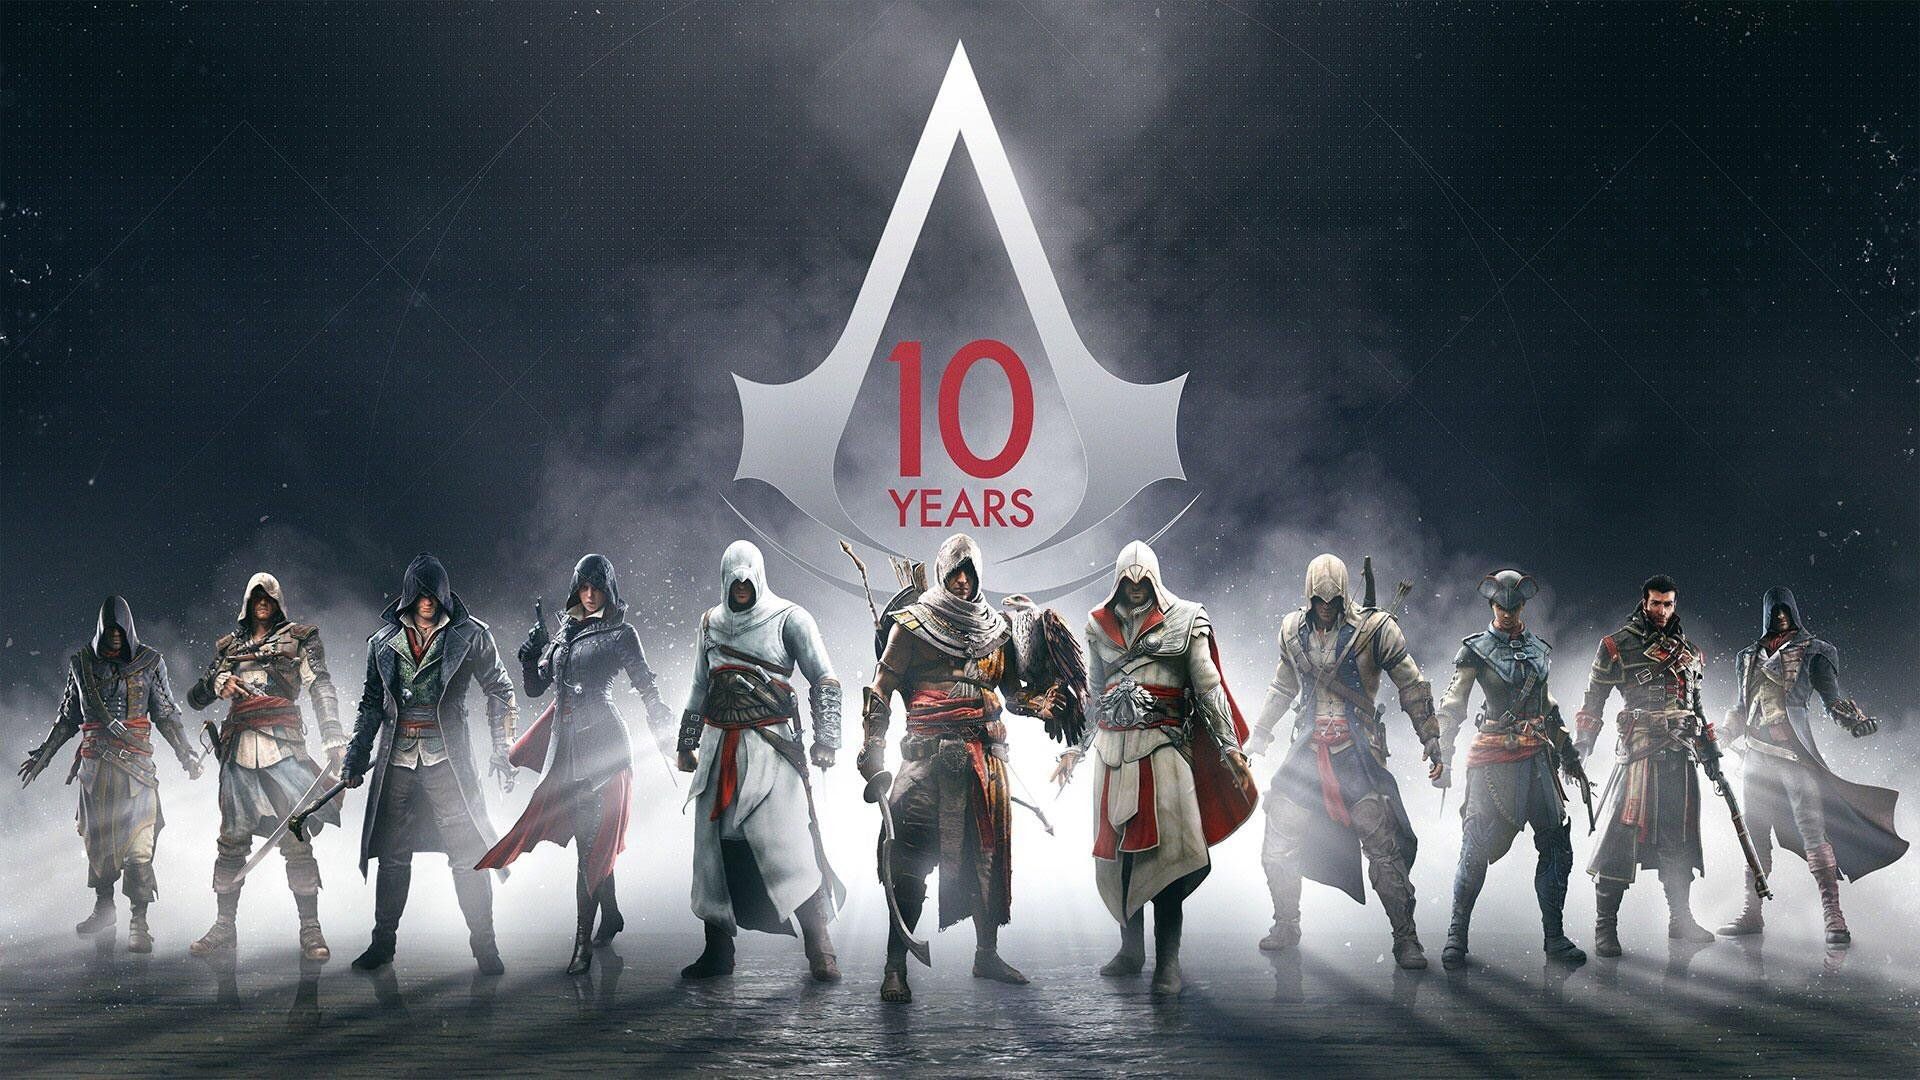 Assassins Creed 10 Years, Assassin&039's Creed 10 Years